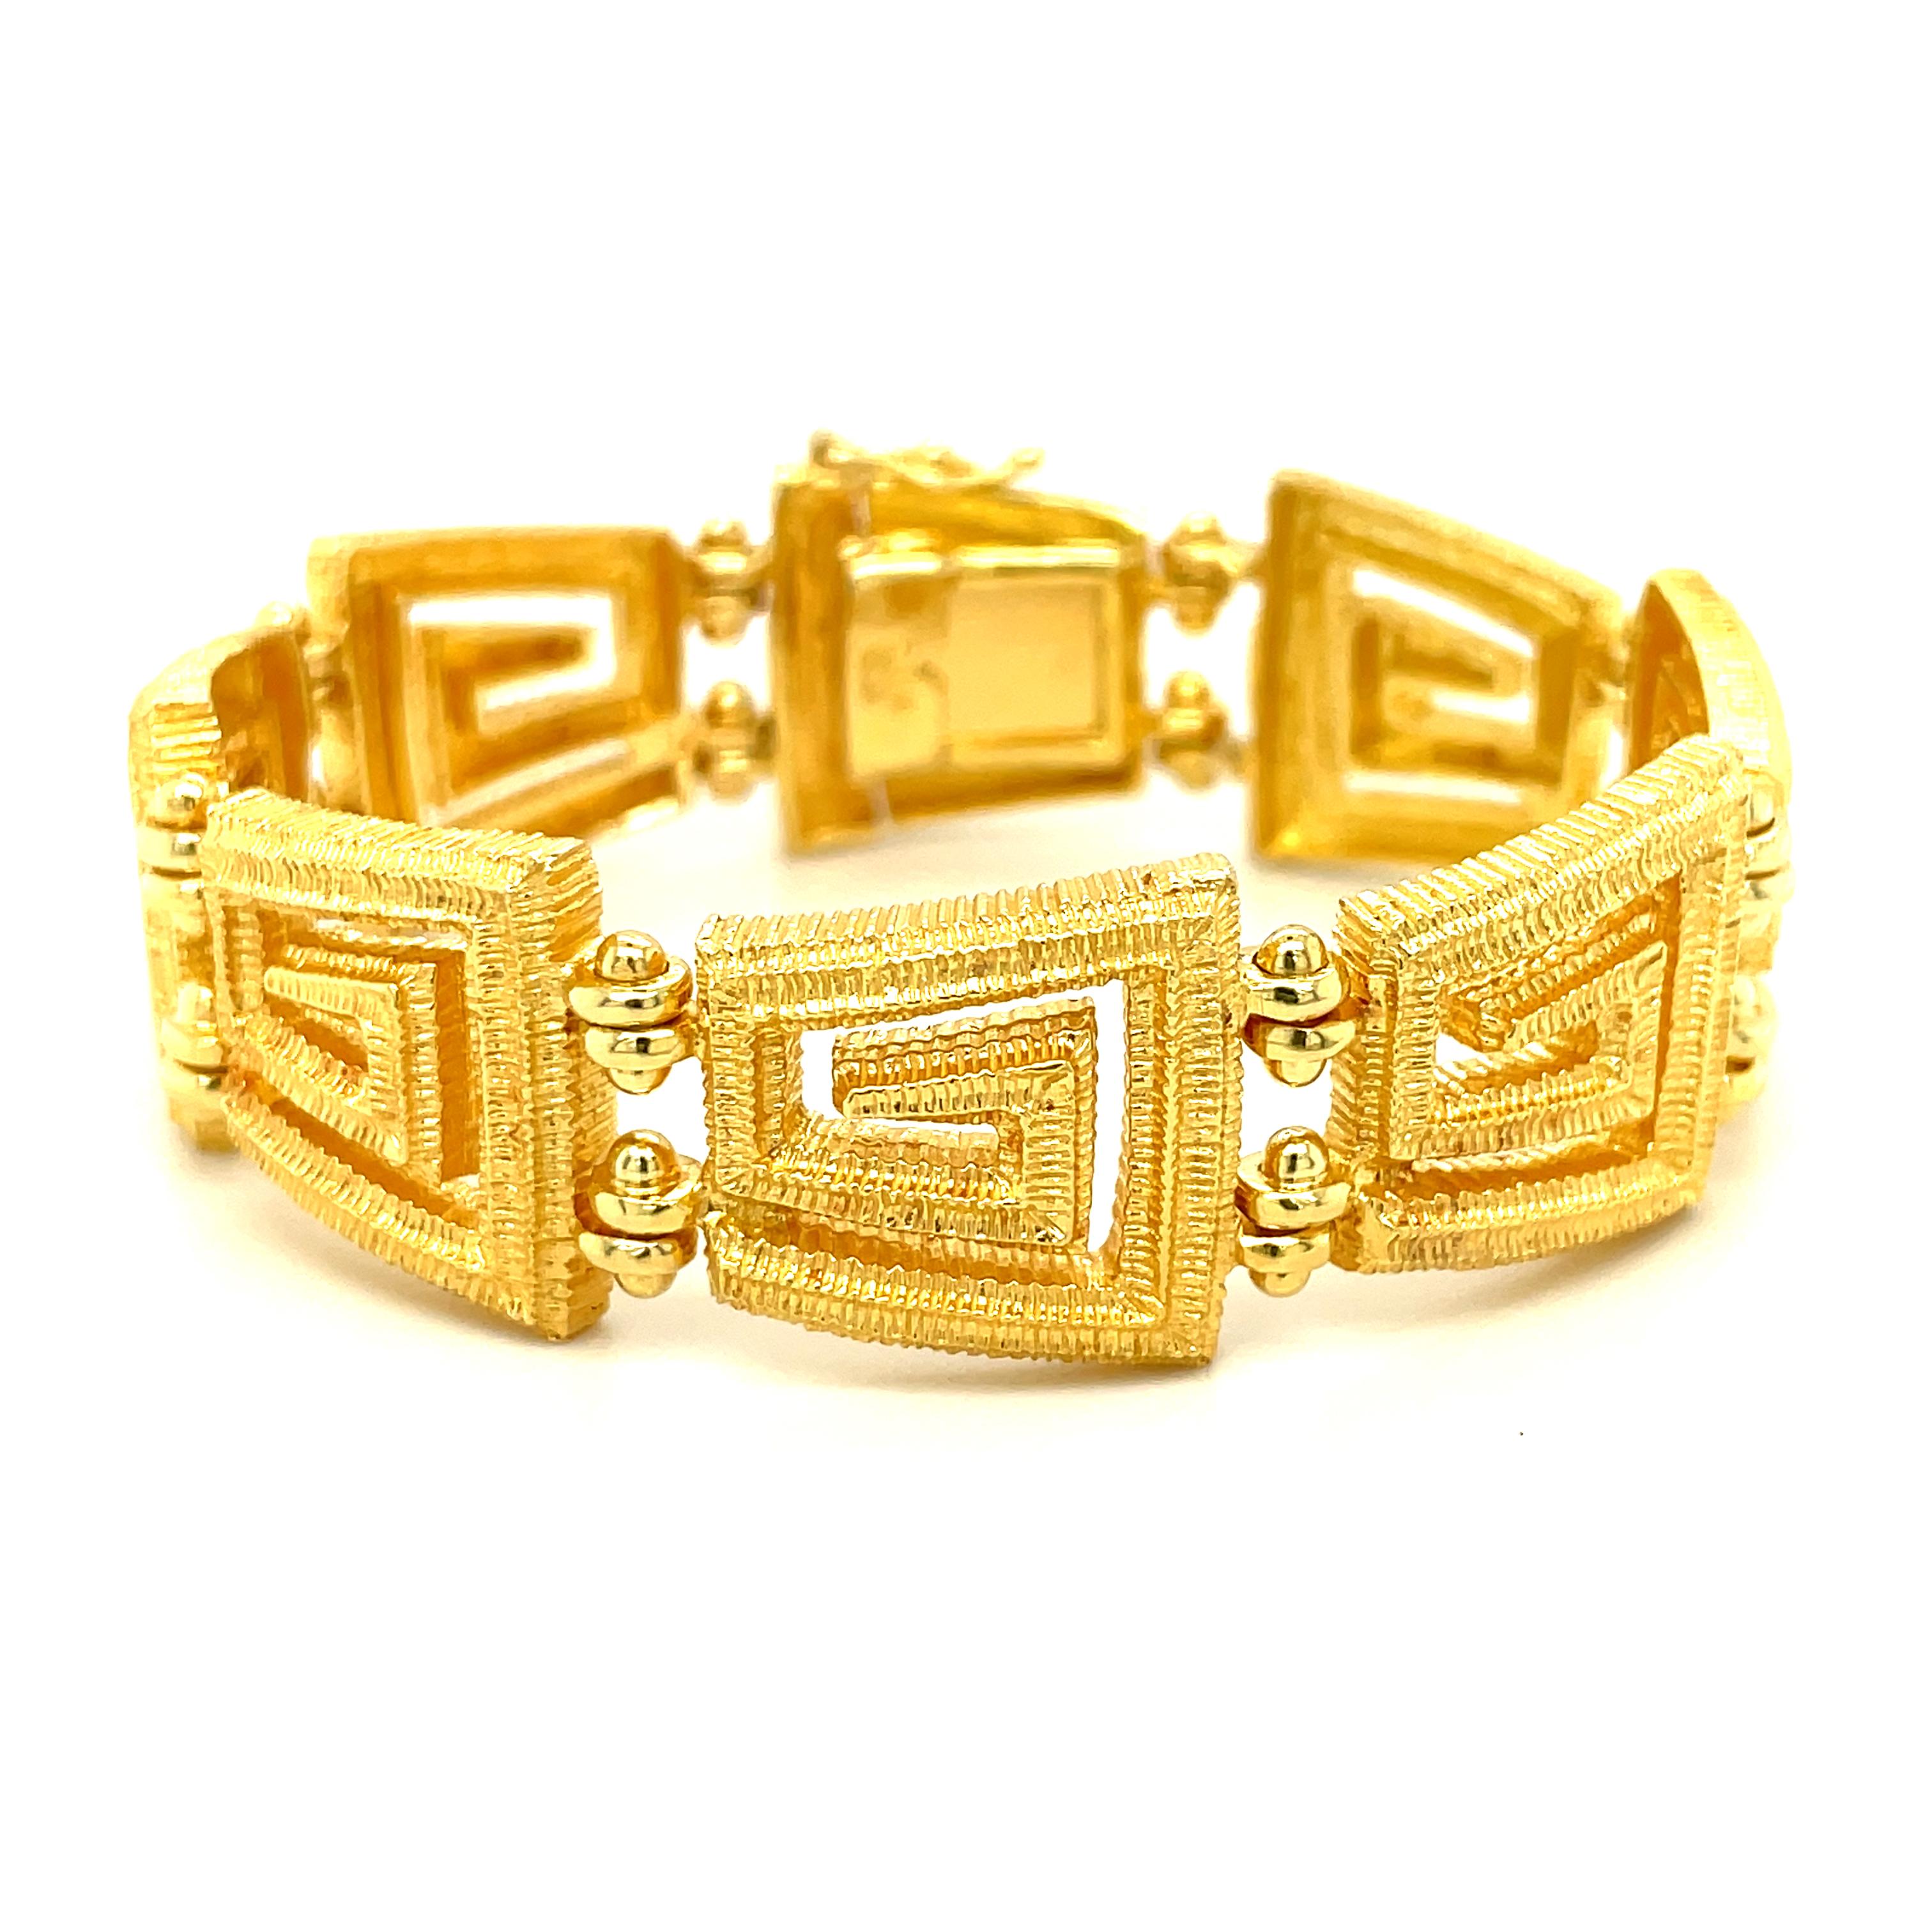 This heavily constructed bracelet features large 18k yellow gold links designed with a repeating Greek key motif. The Greek key design has appeared in civilizations across the globe for centuries, with a geometric appearance that is both artistic